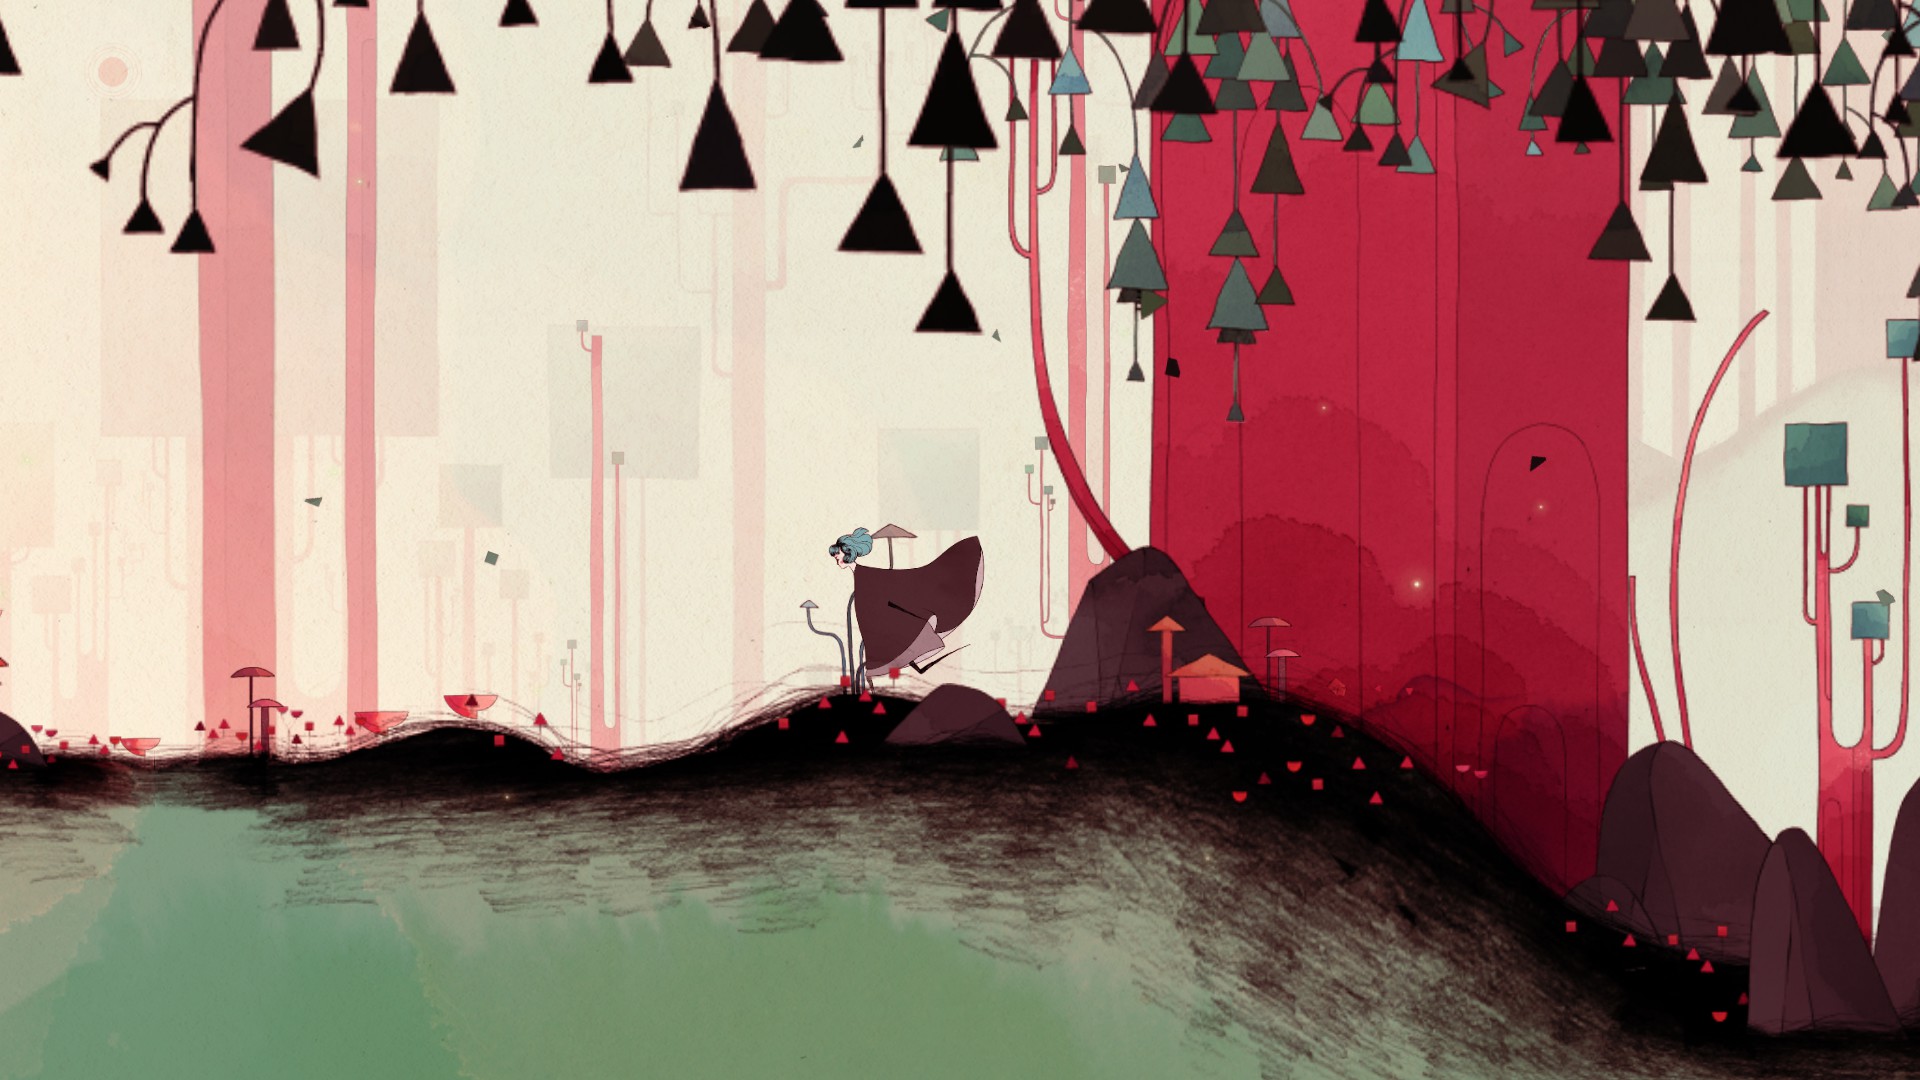 Gris Video Game Video Game Art Video Games 1920x1080